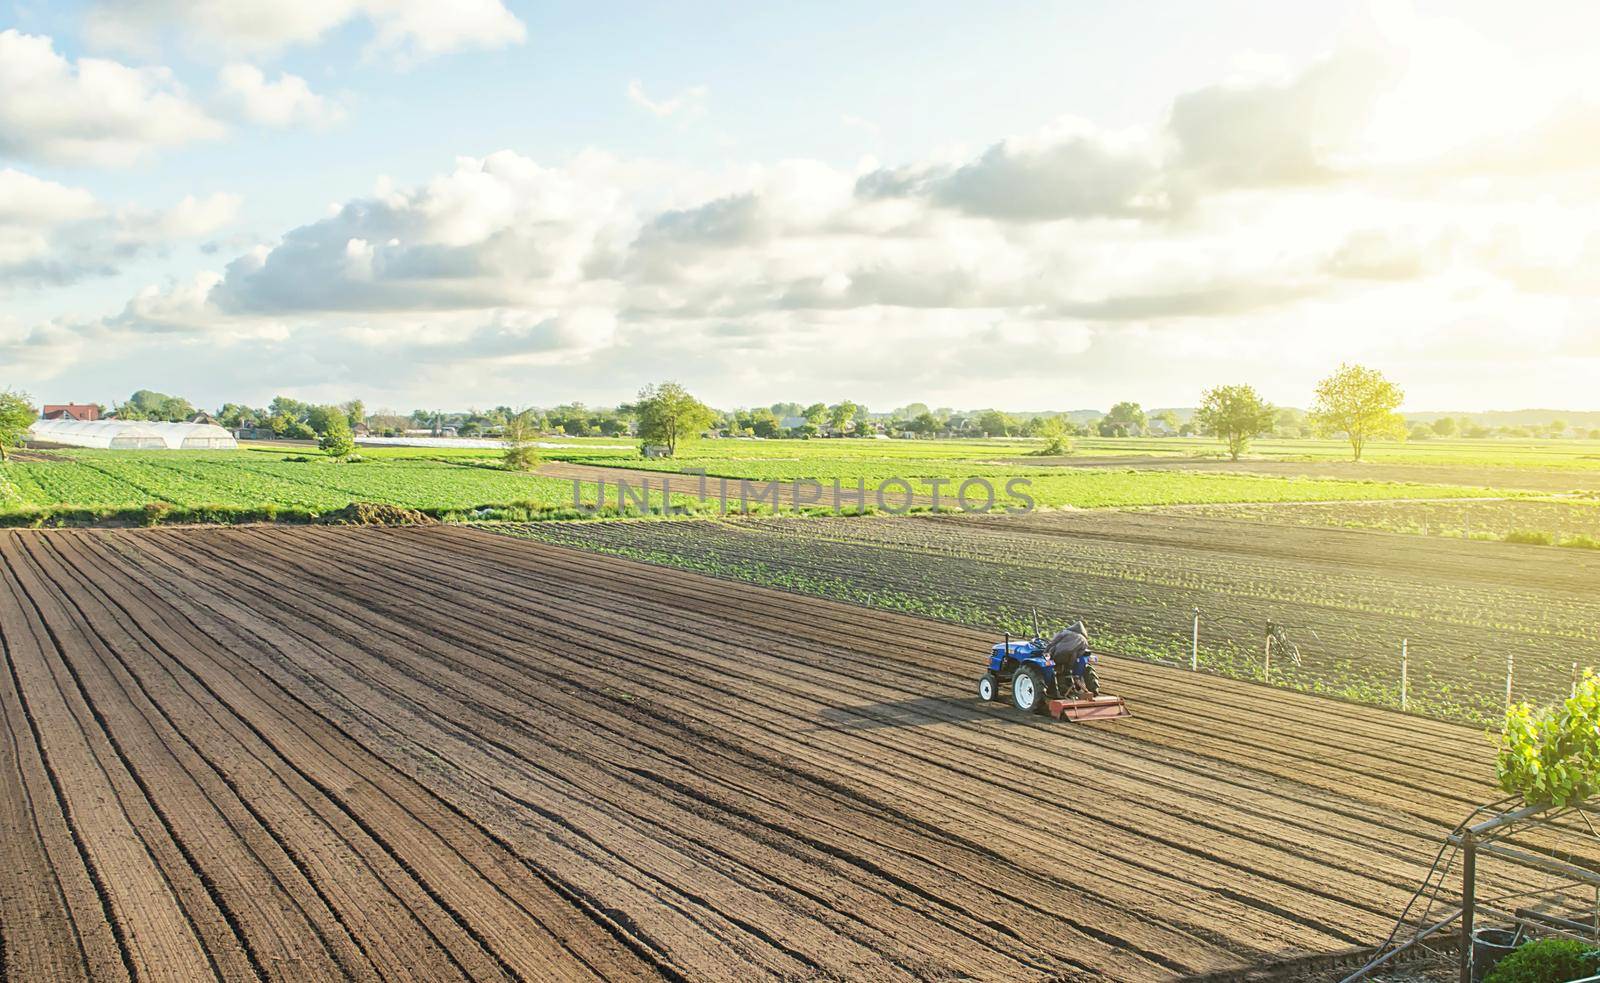 A tractor rides on a farm field. Farmer on a tractor with milling machine loosens, grinds and mixes soil. Farming and agriculture. Loosening the surface, cultivating the land for further planting.